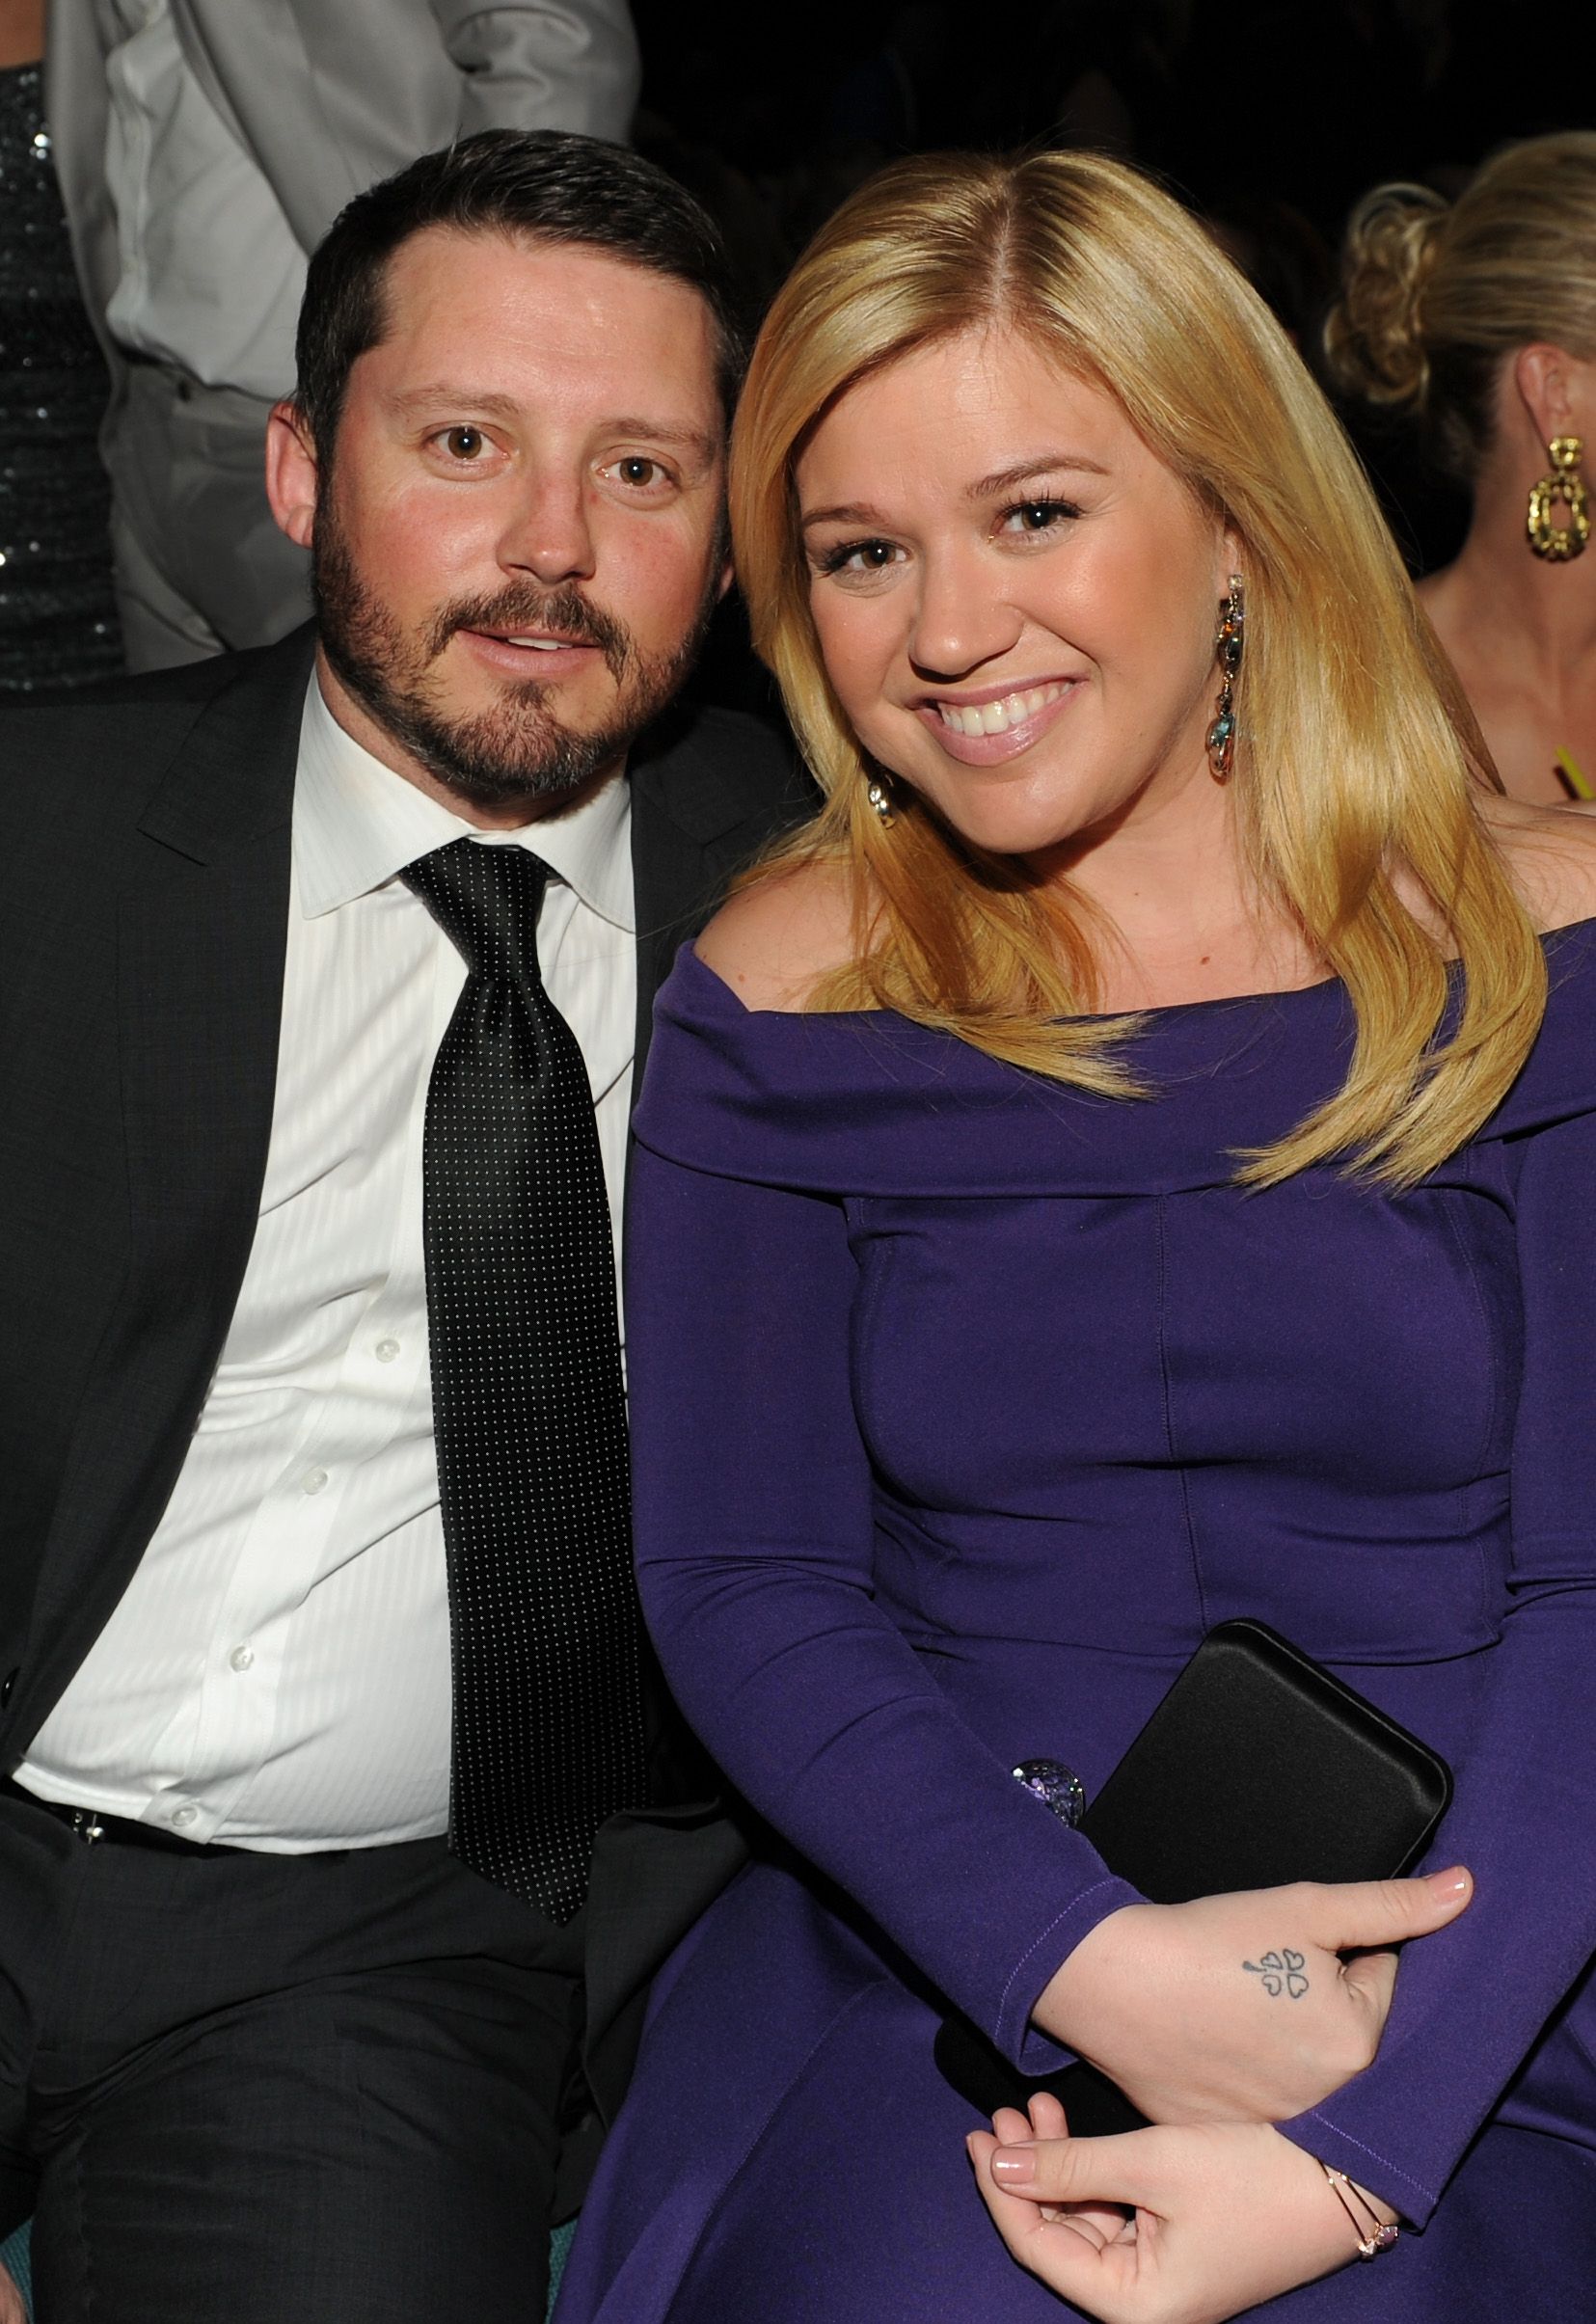 Brandon Blackstock and Kelly Clarkson during the 48th Annual Academy of Country Music Awards on April 7, 2013, in Las Vegas, Nevada. | Source: Getty Images